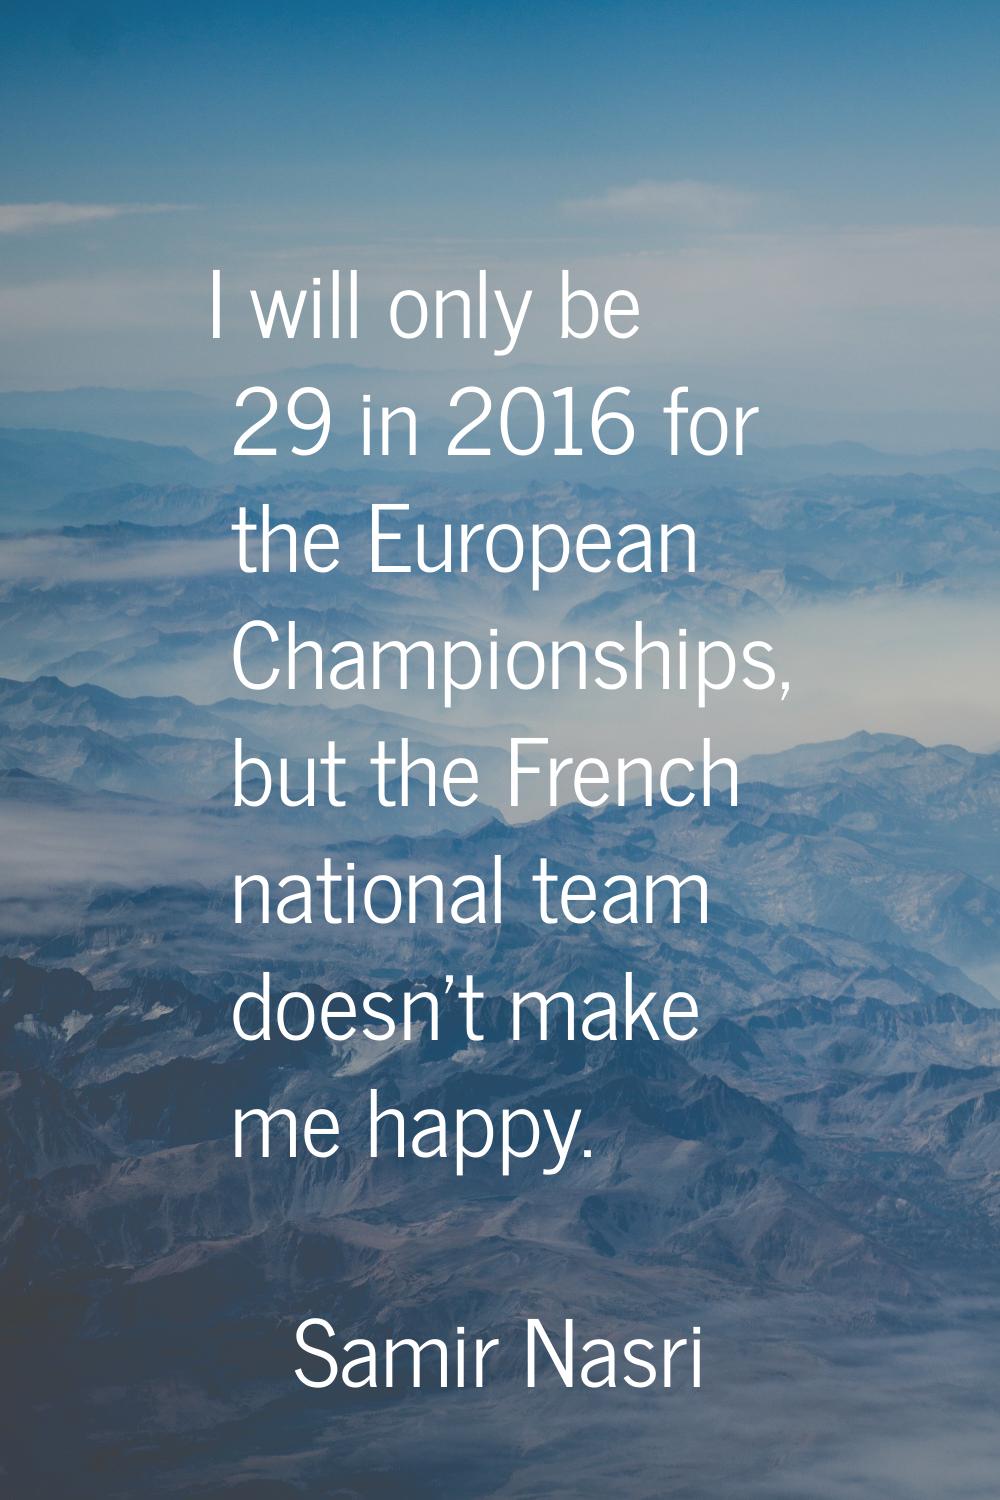 I will only be 29 in 2016 for the European Championships, but the French national team doesn't make